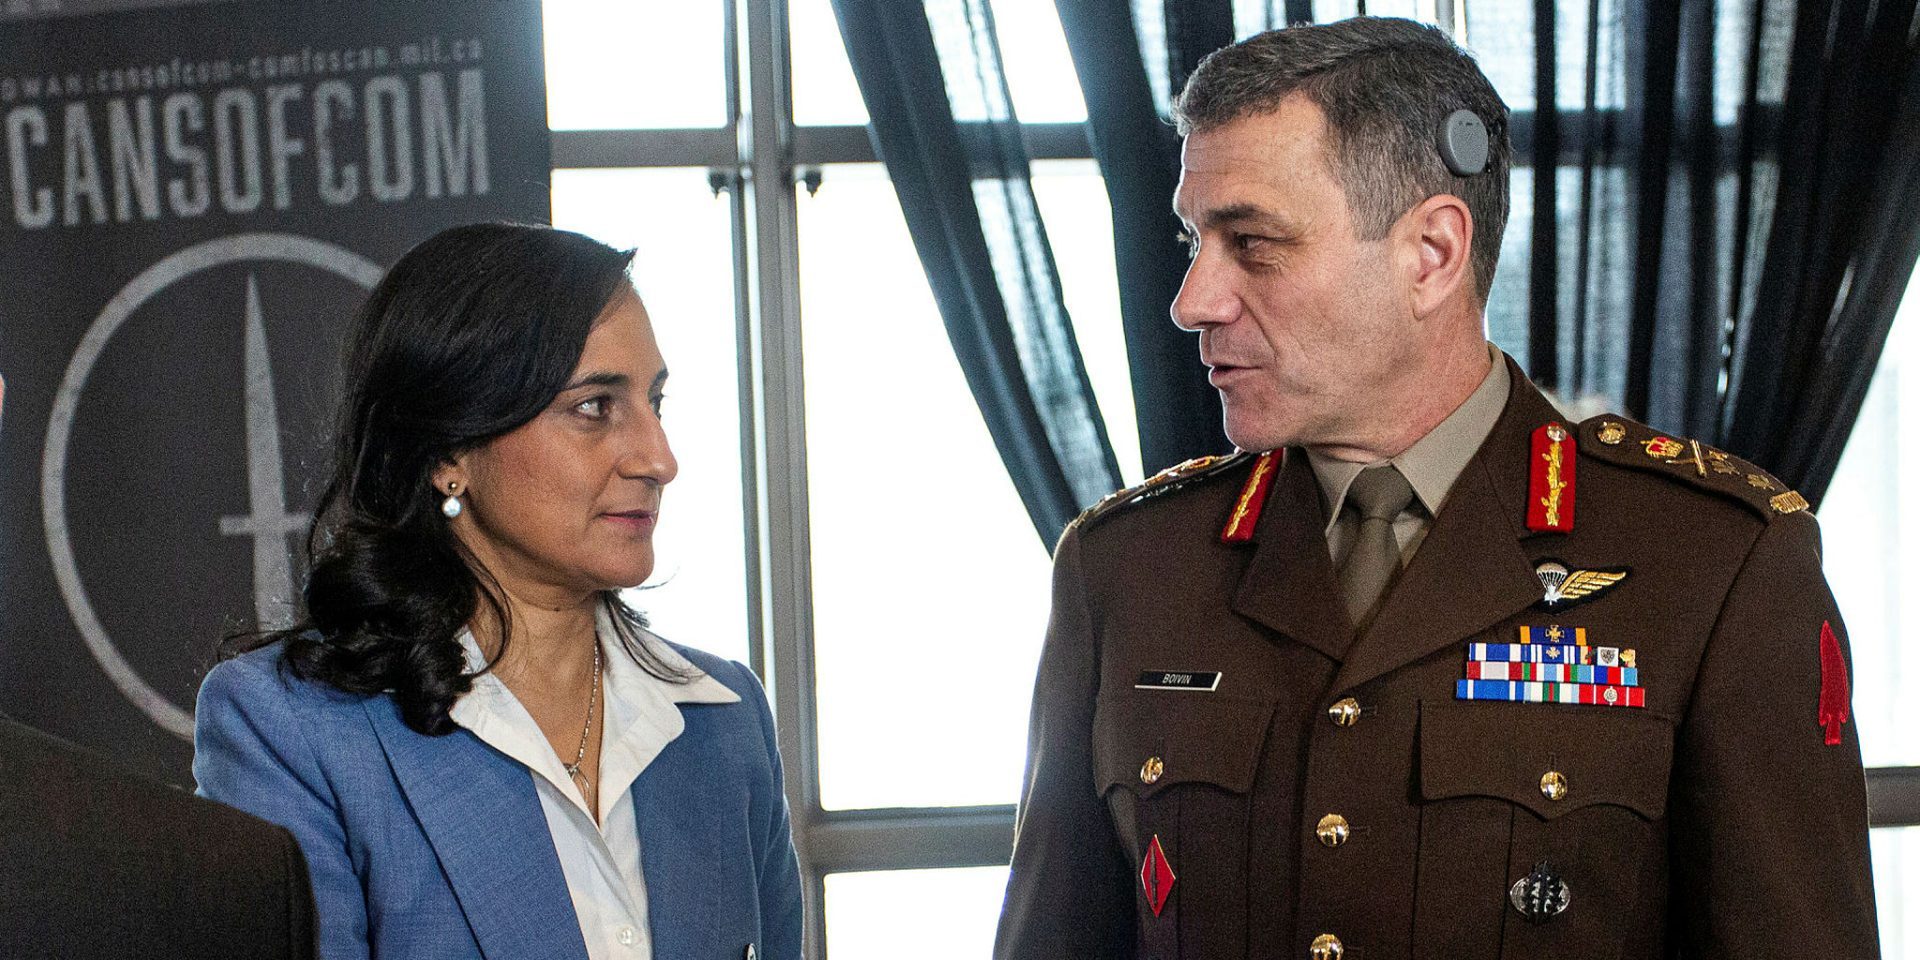 National Defence Minister Anita Anand, left, speaks with Maj.-Gen. Steve Boivin, commander of the Canadian Special Operations Command, after a press conference at National Defence headquarters in downtown Ottawa on March 21 to announce $1.4-billion in funding to revitalize the JTF-2 training site at Dwyer Hill. The Hill Times photograph by Andrew Meade